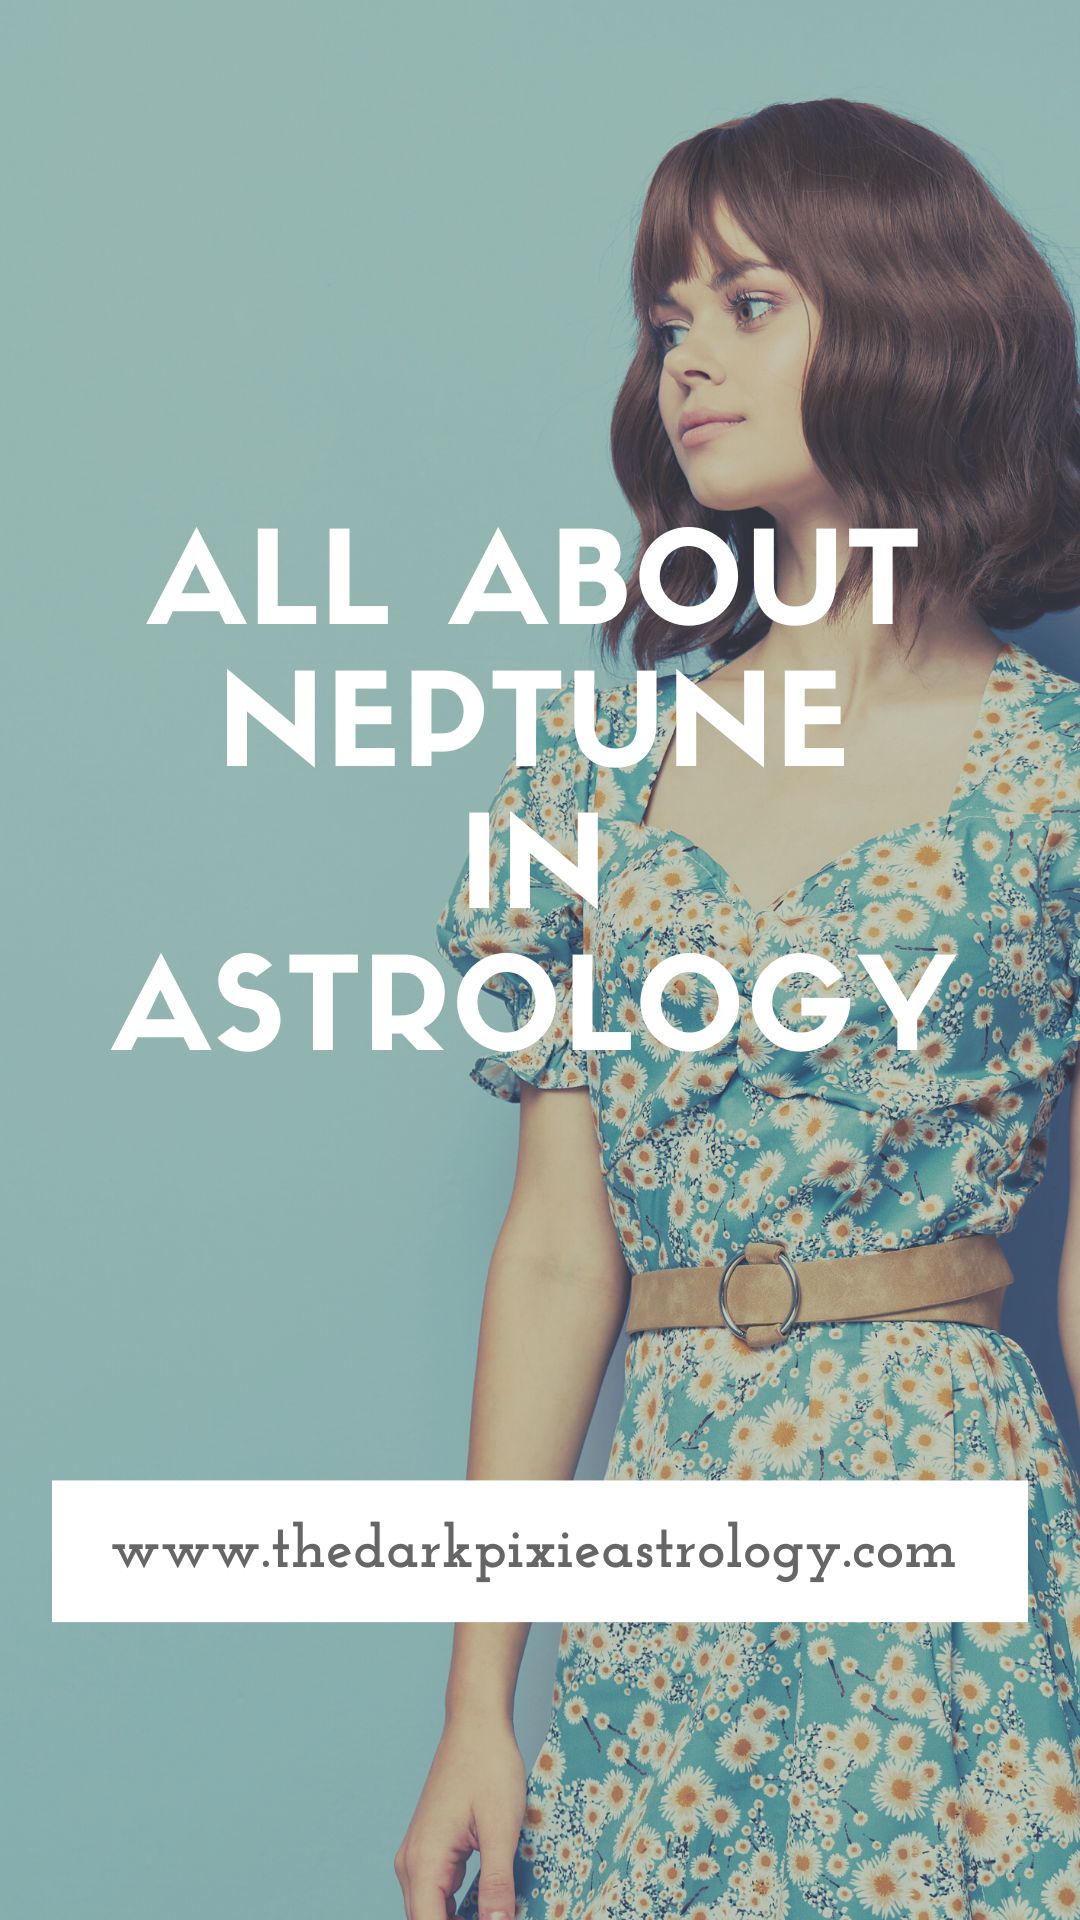 All About Neptune in Astrology - The Dark Pixie Astrology